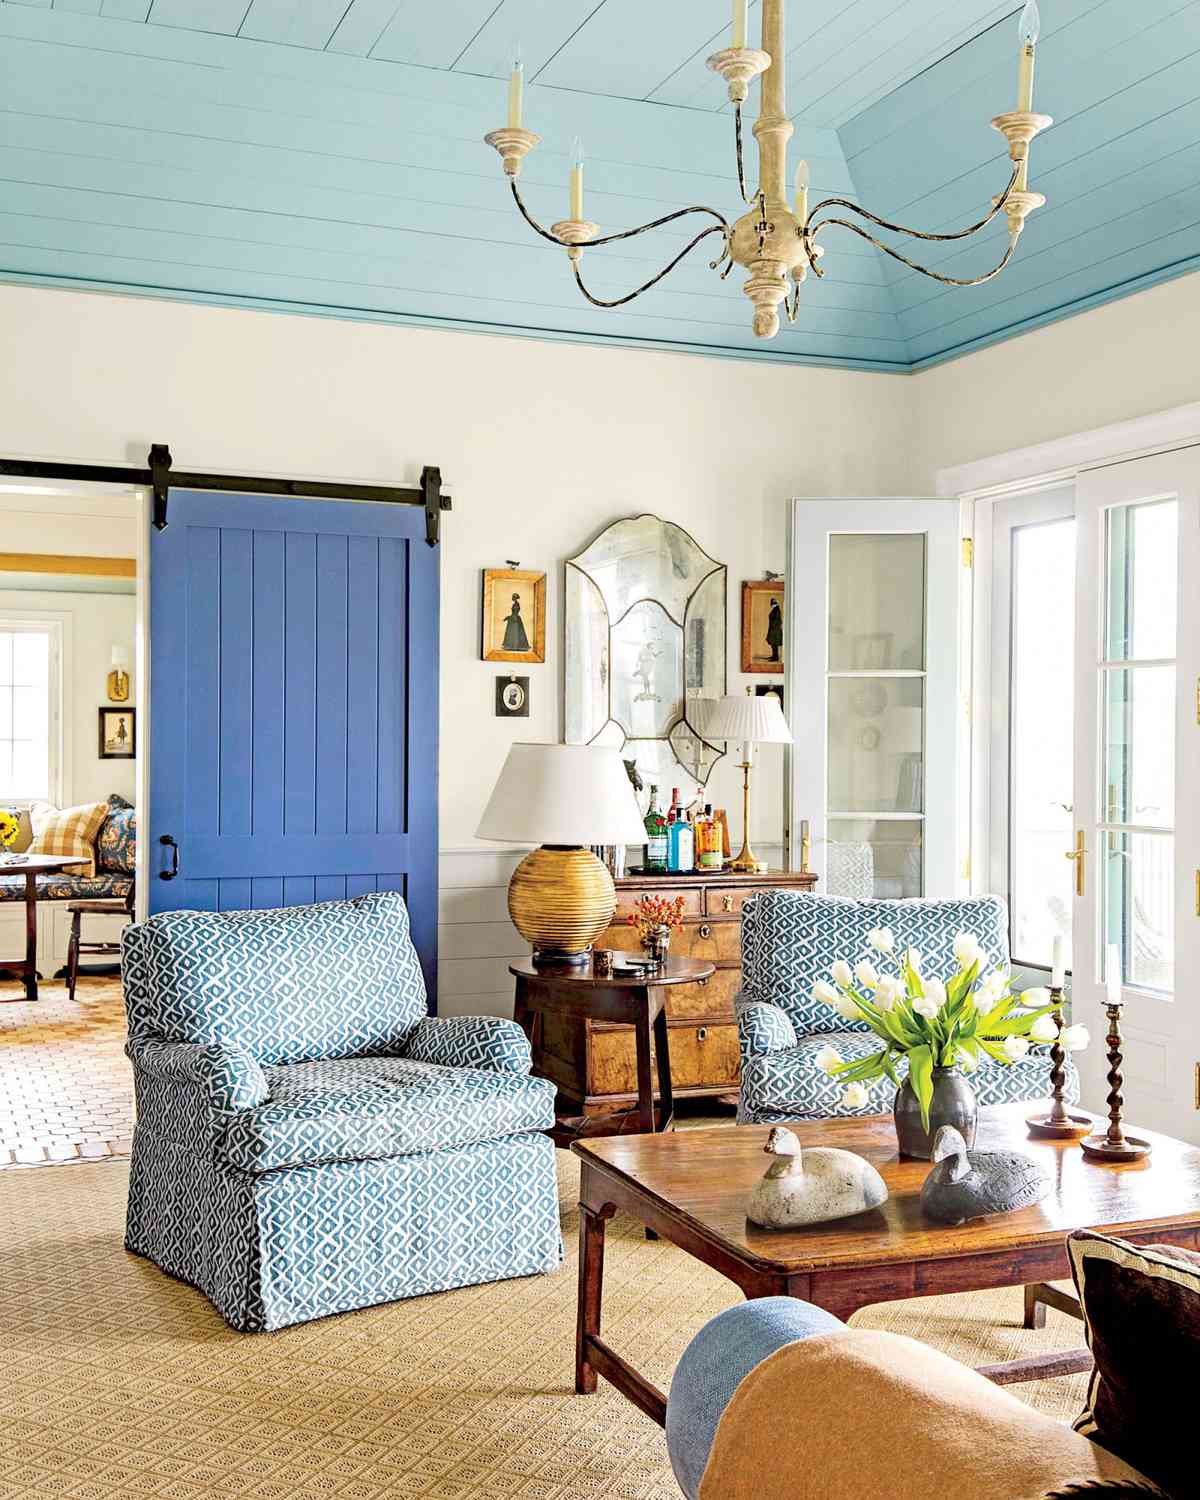 20 Living Room Decorating Ideas   Southern Living